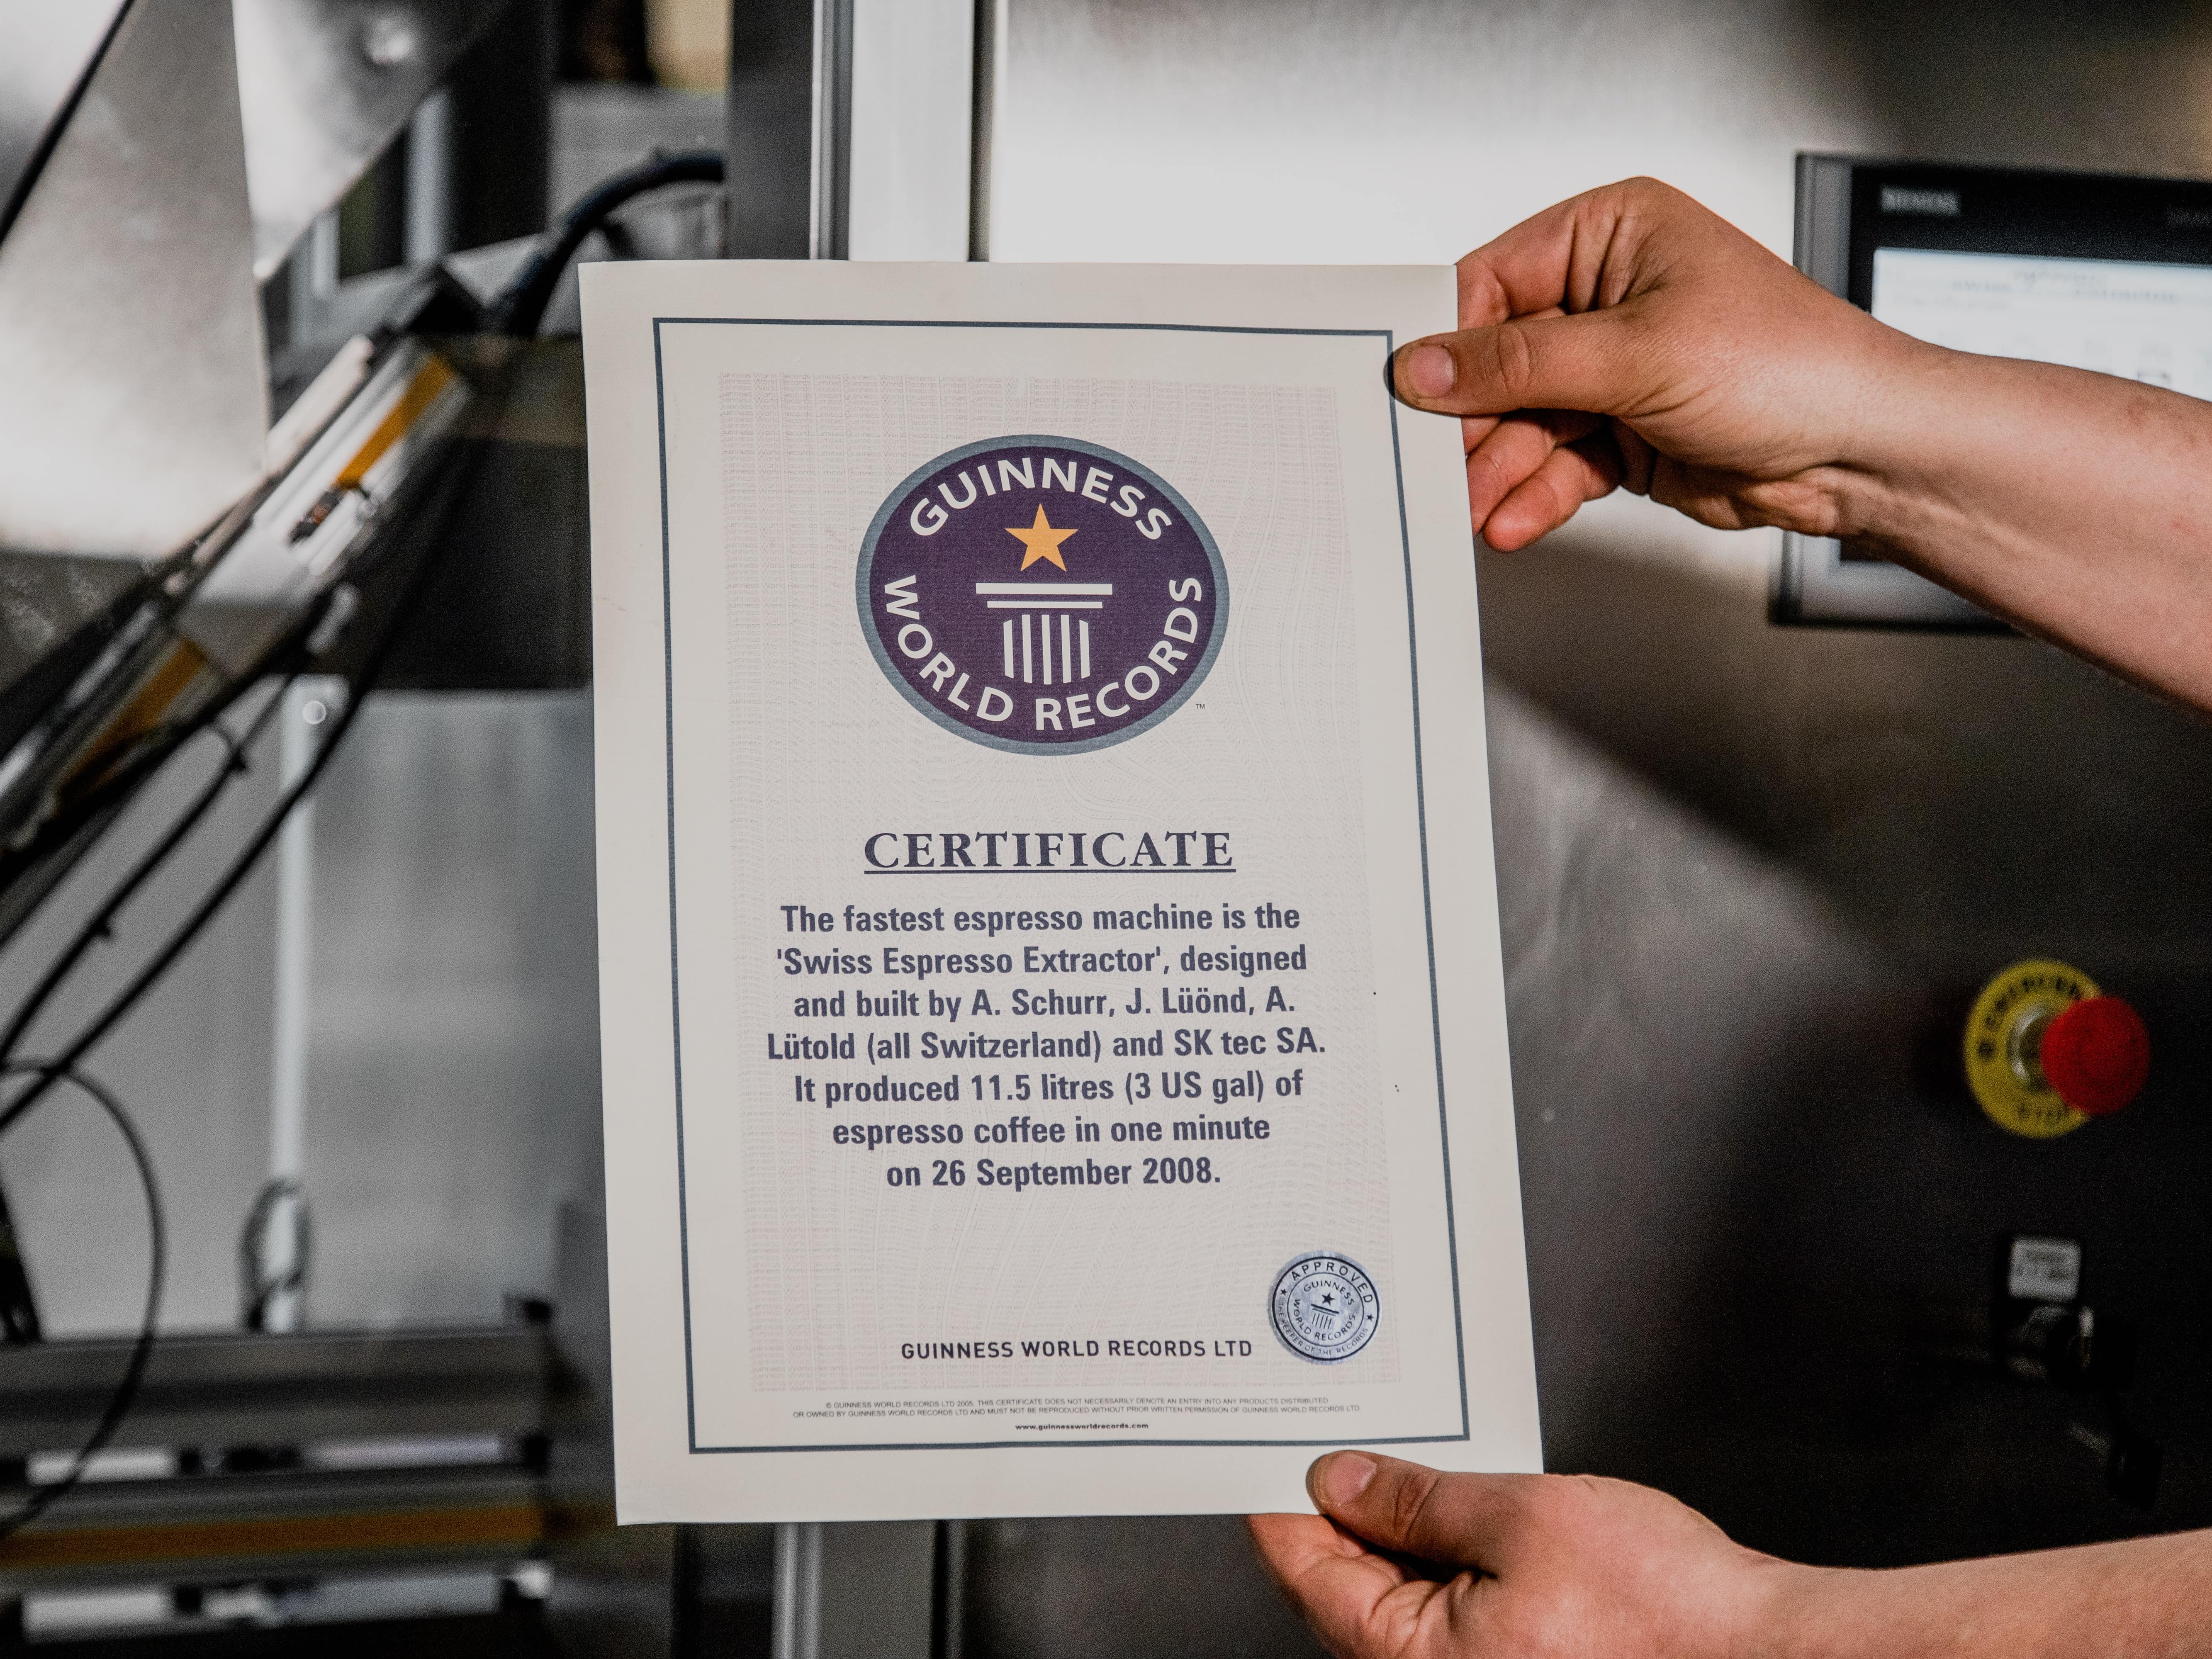 certificate of the Guinness world record of the SWISS ESPRESSO EXTRACTOR